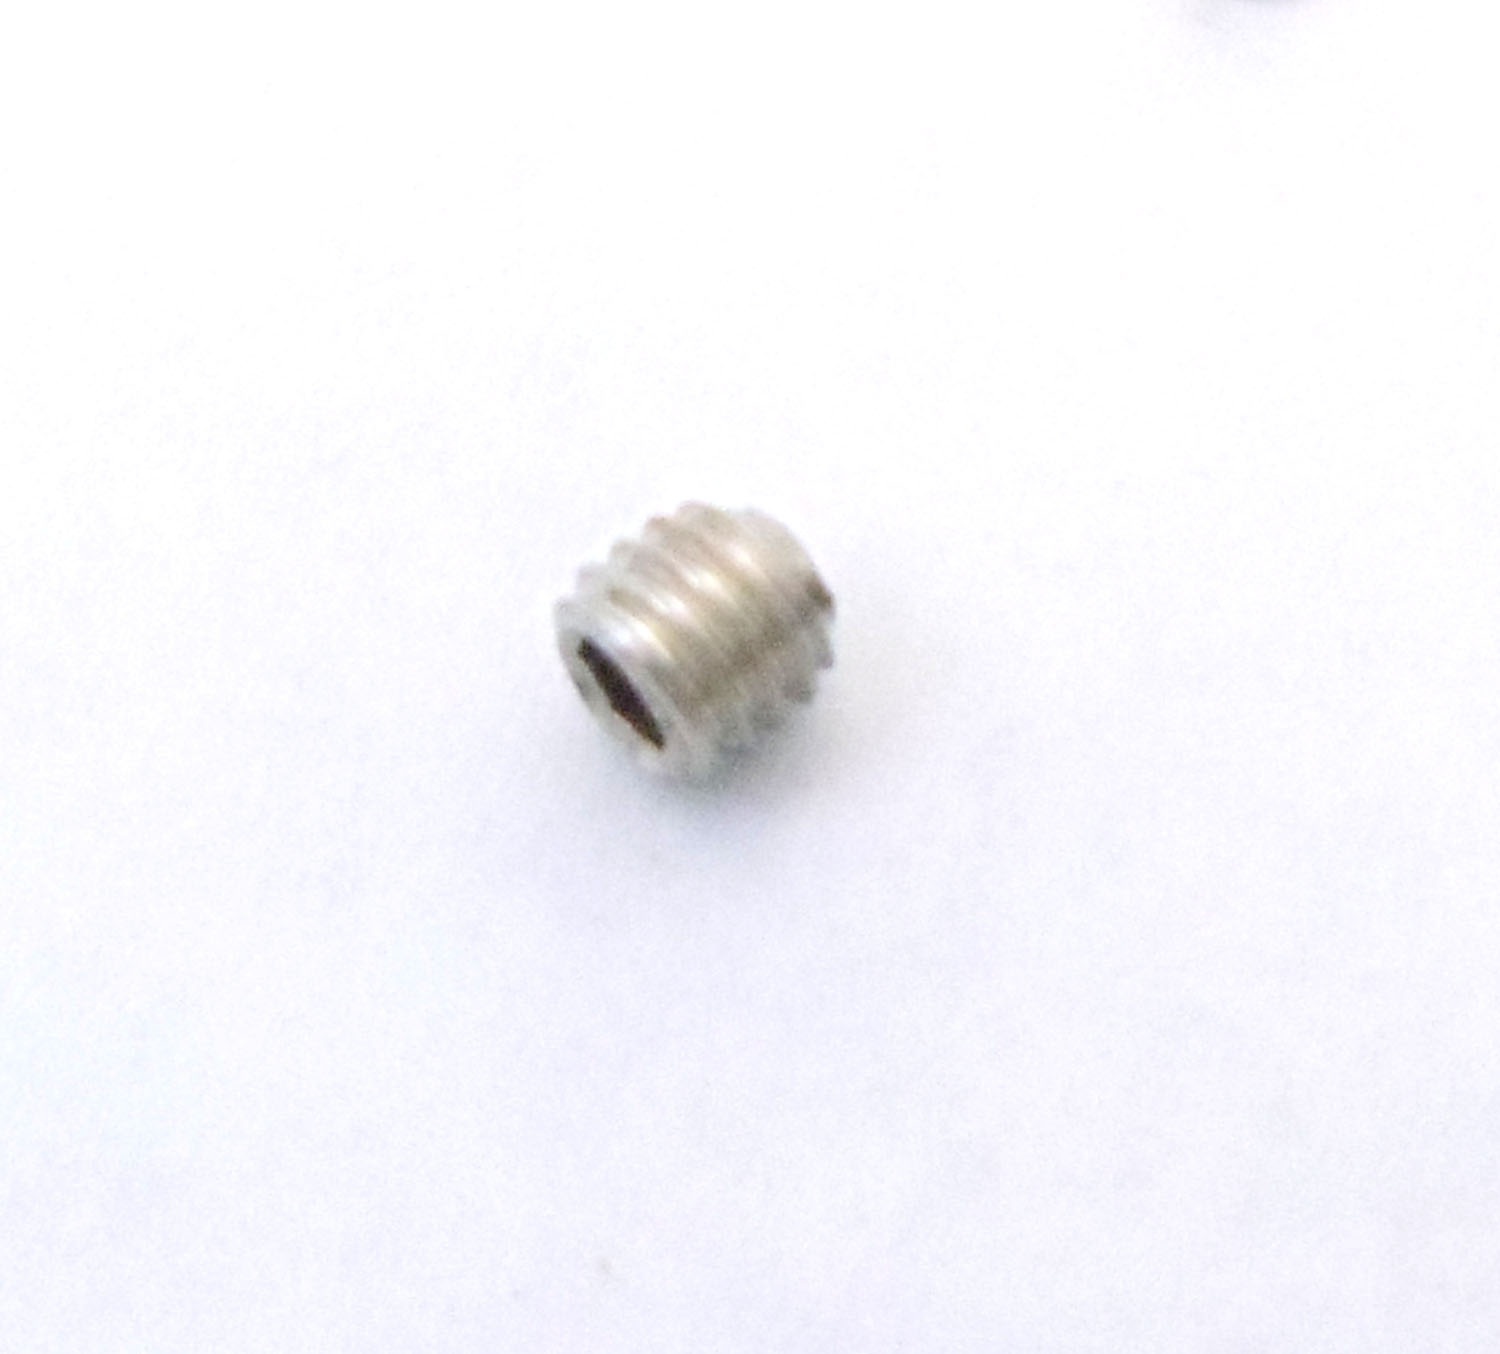 Wilson - Replacement Set Screw For Wilson 500,1000, 5000 And Little Wil Antennas